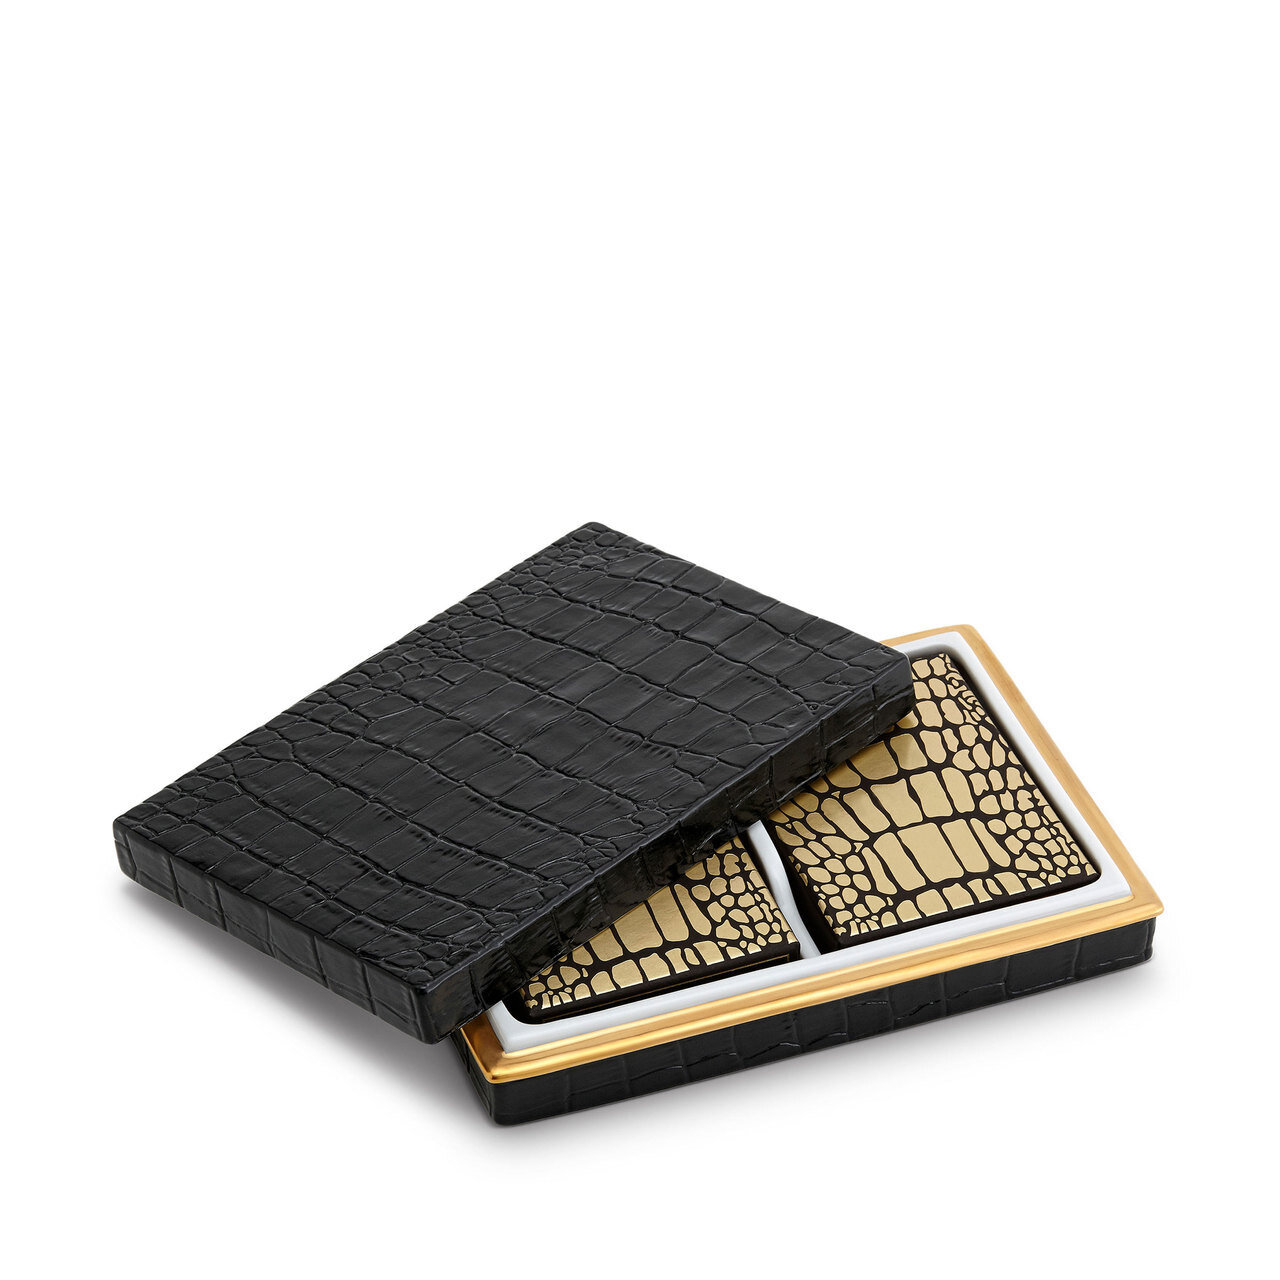 L'Objet Crocodile Gold Box with Playing Cards Two Decks